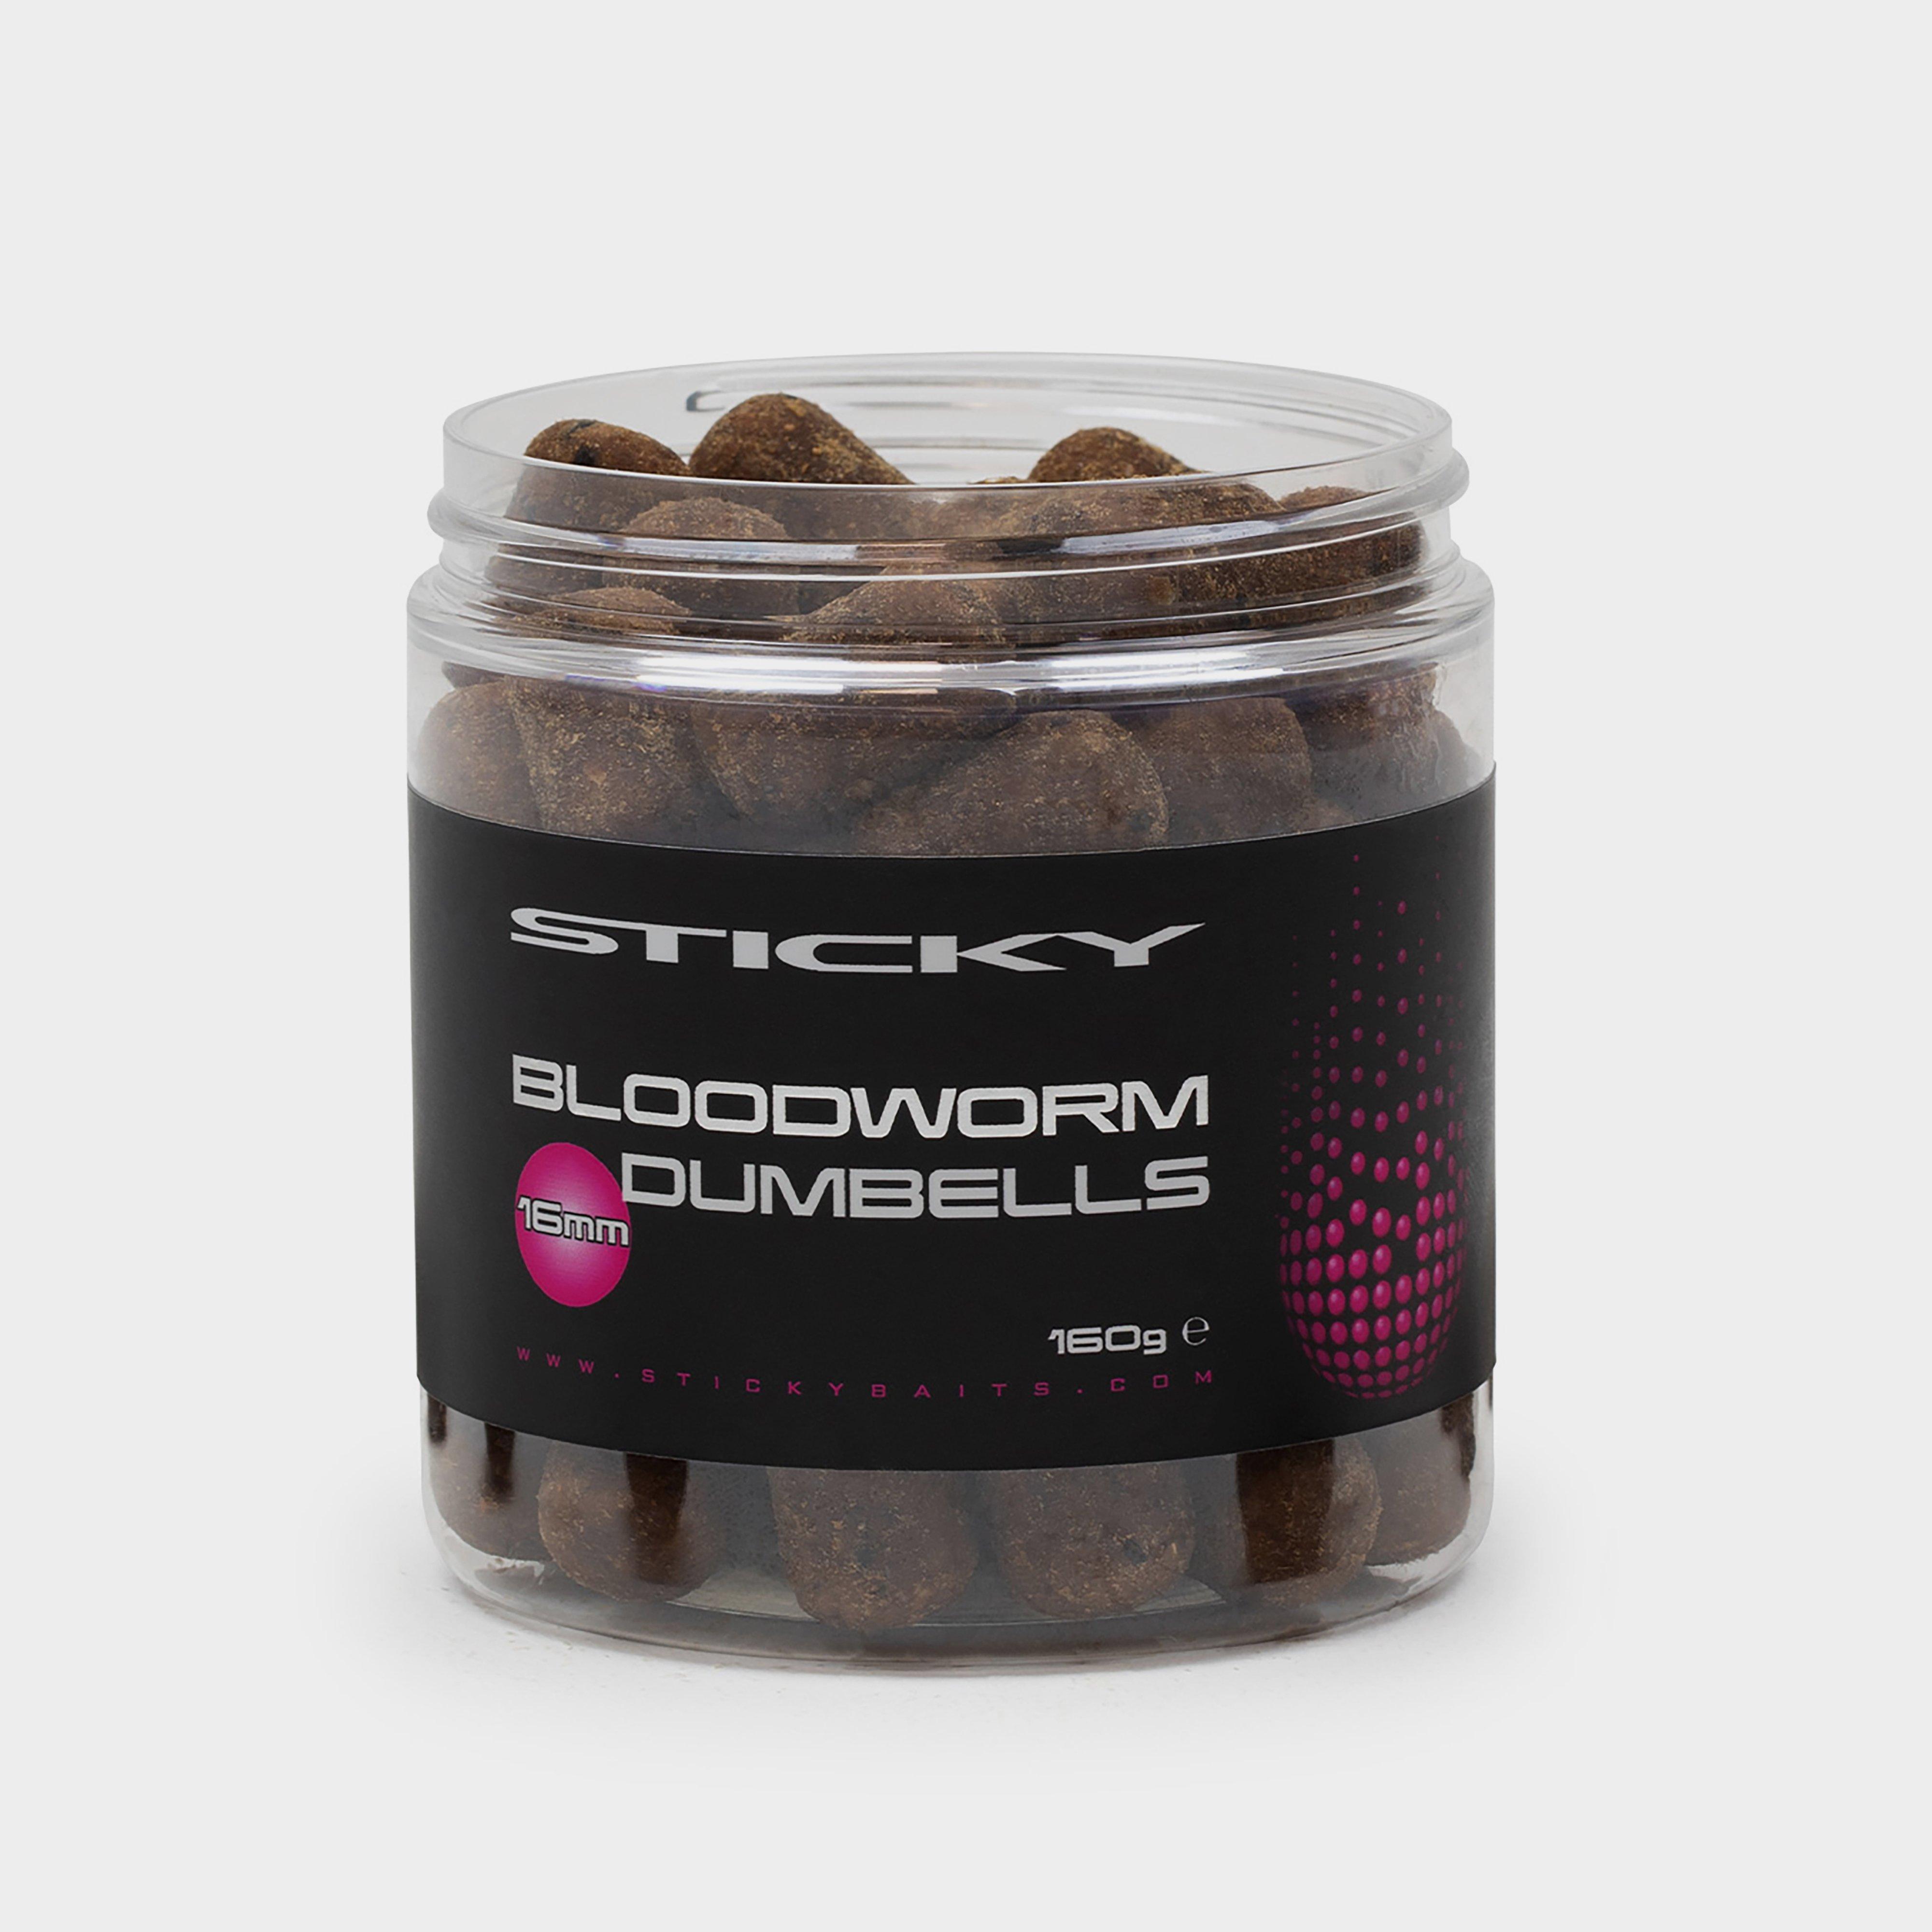 Photos - Bait Sticky Baits Bloodworm Dumbell 16Mm, Multi Coloured 